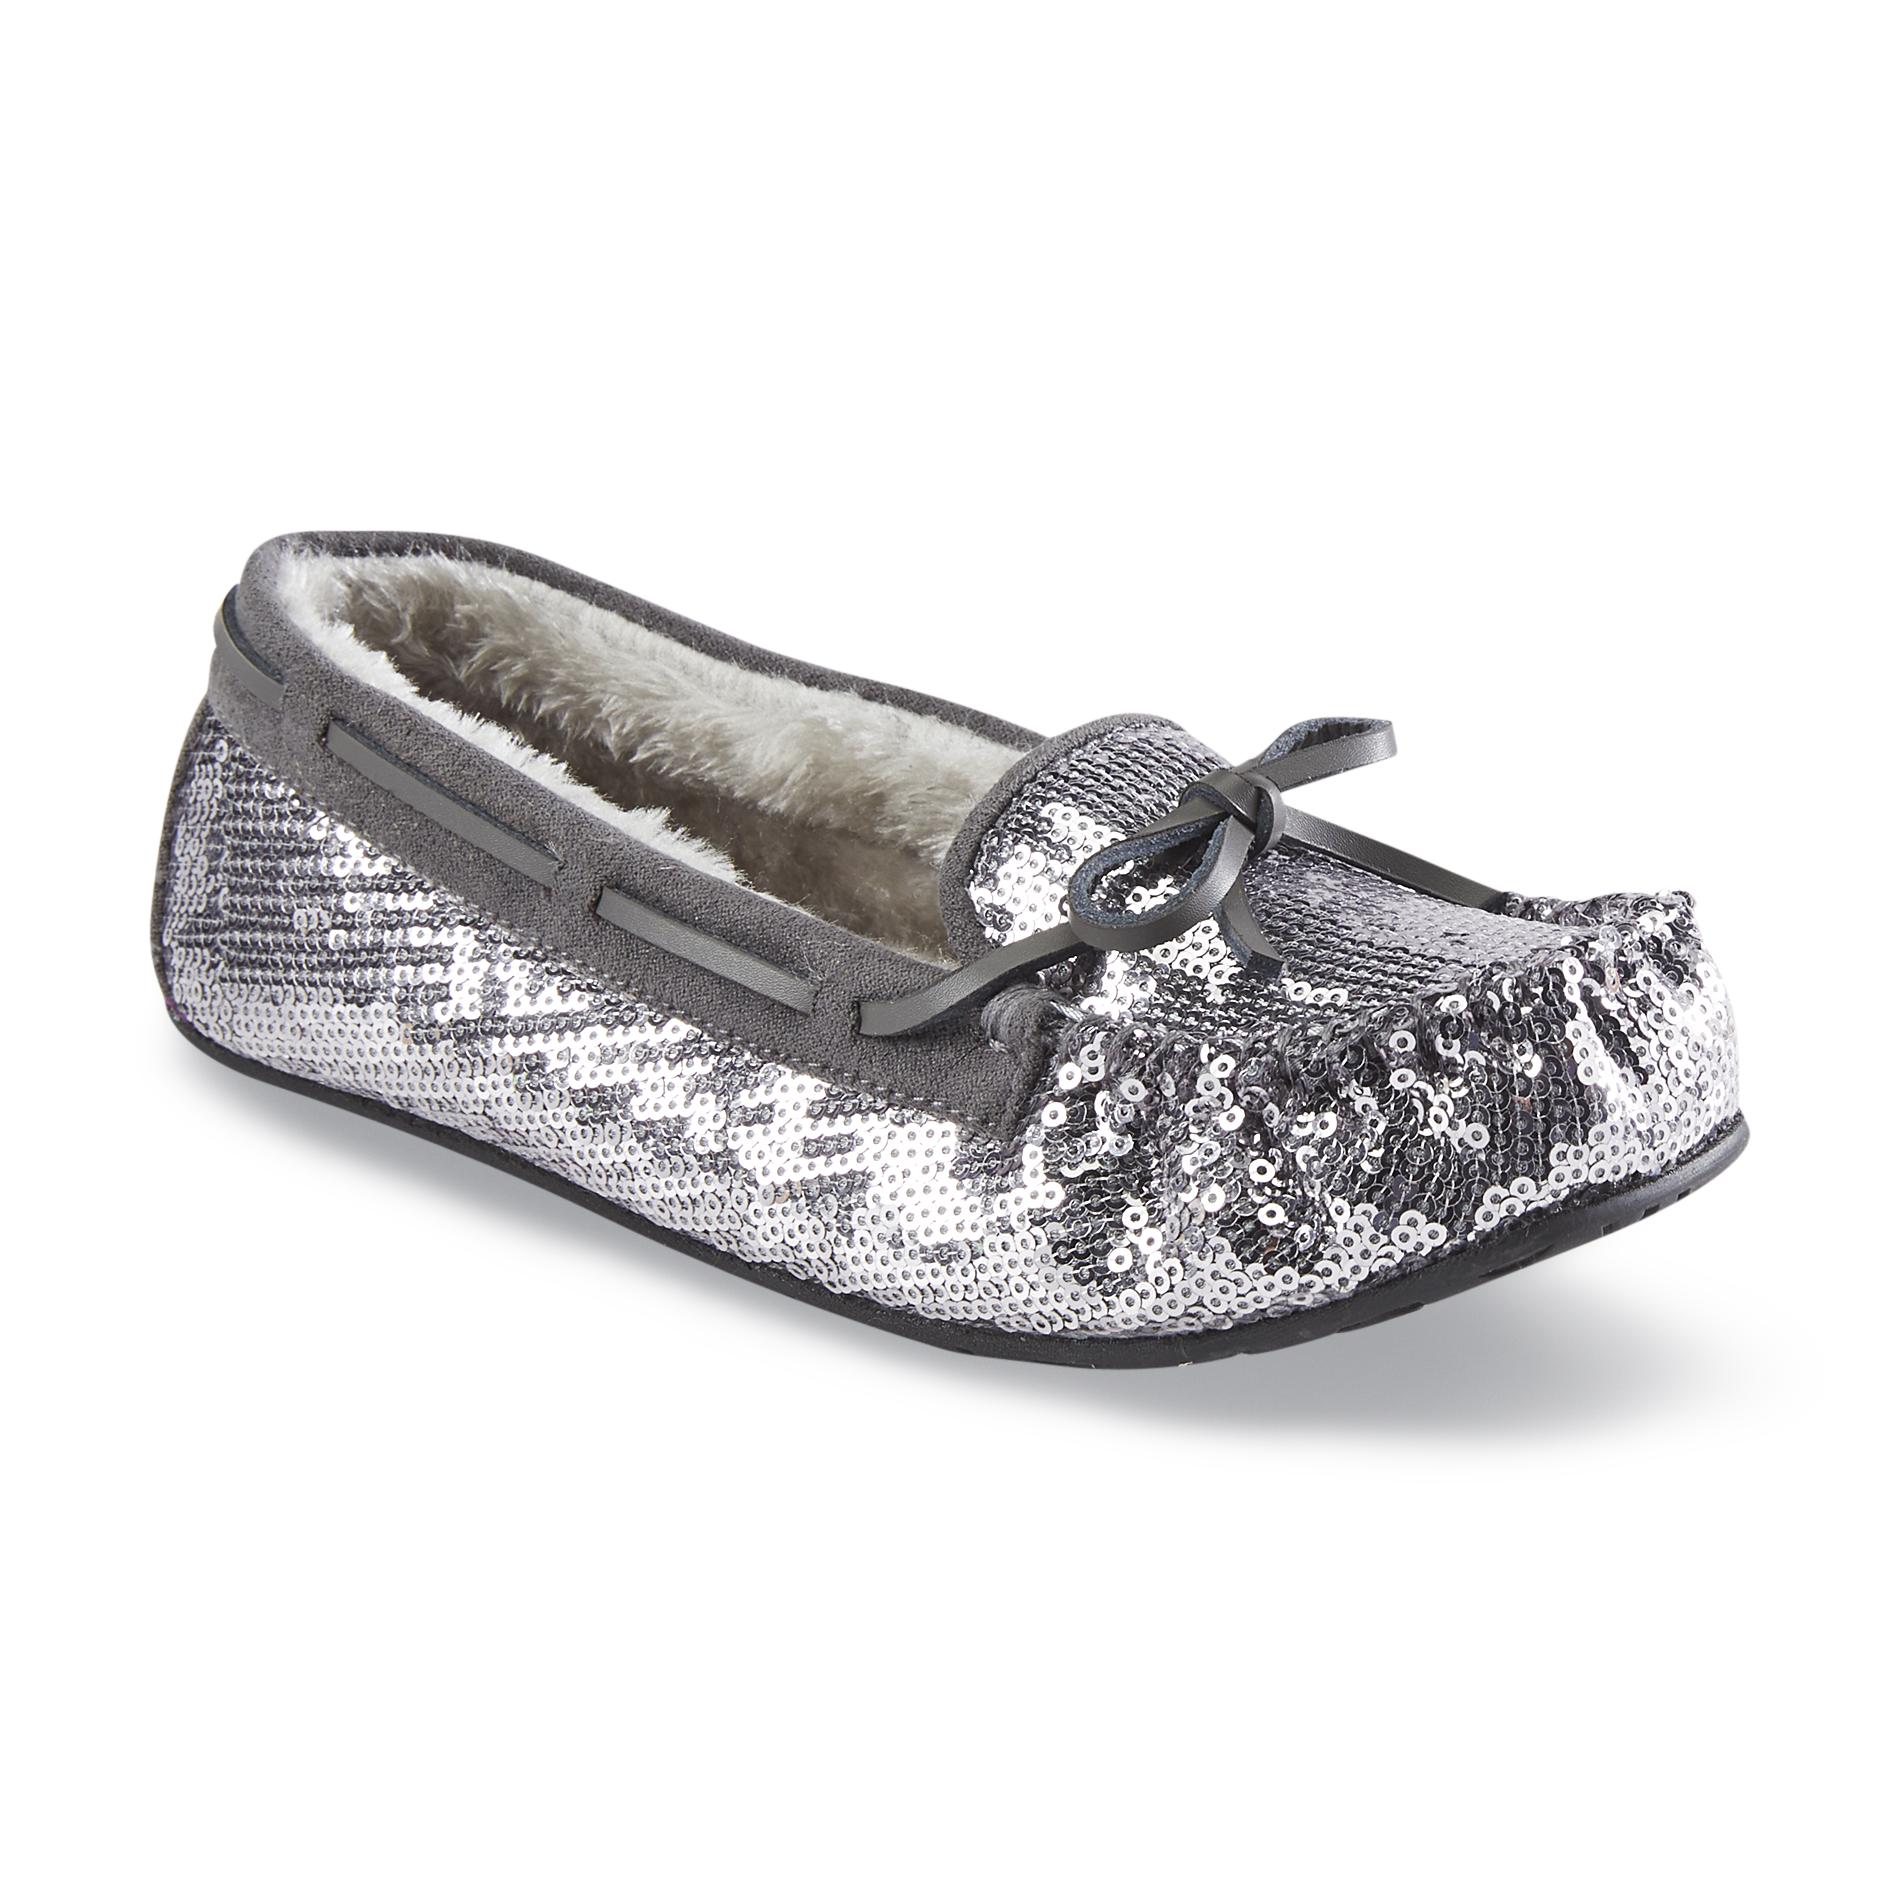 Route 66 Women's Milah Pewter/Sequined Moccasin Slipper